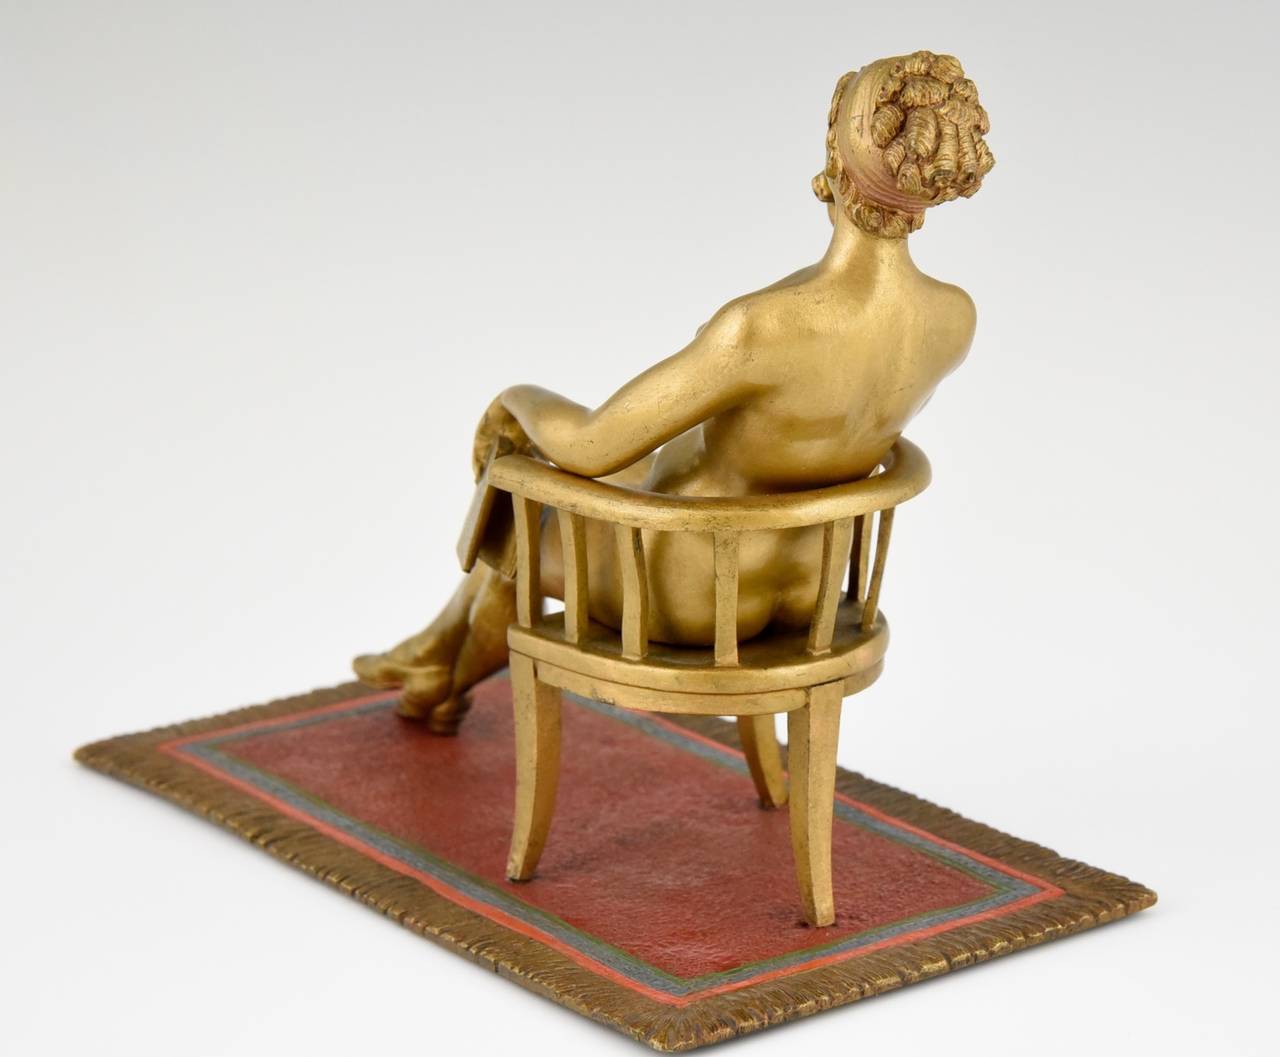 Cold-Painted Erotic Cold Painted Vienna Bronze sculpture of a Nude in a Chair 1900